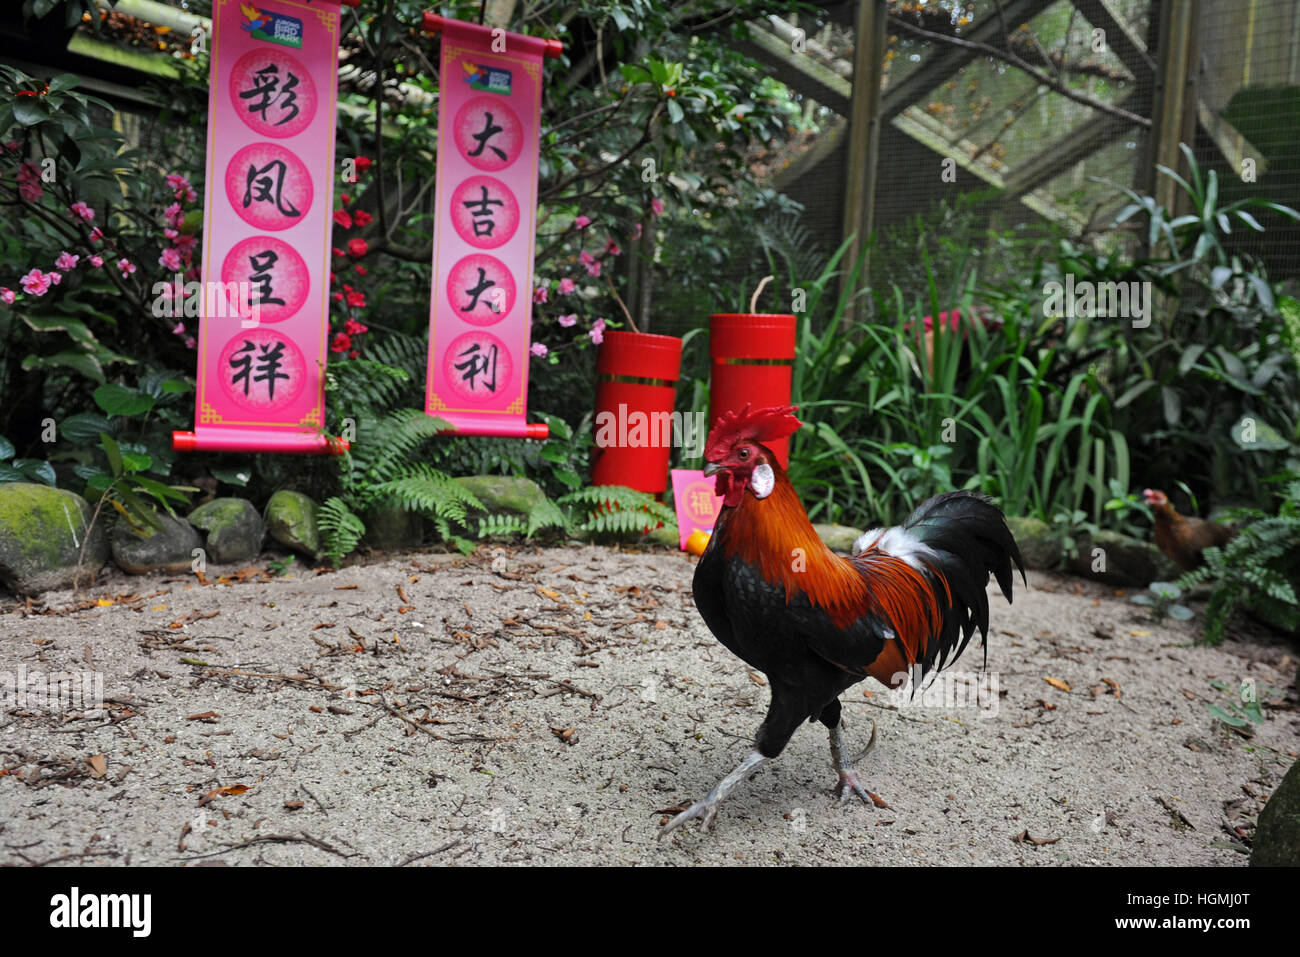 Singapore. 11th Jan, 2017. A red junglefowl is seen near lunar New Year decorations in Singapore's Jurong Bird Park, Jan. 11, 2017. The Jurong Bird Park unveiled the Fowl Trail on Wednesday, showcasing an assortment of pheasants, peafowls and junglefowls as part of the celebrations for the upcoming Year of Rooster. © Then Chih Wey/Xinhua/Alamy Live News Stock Photo